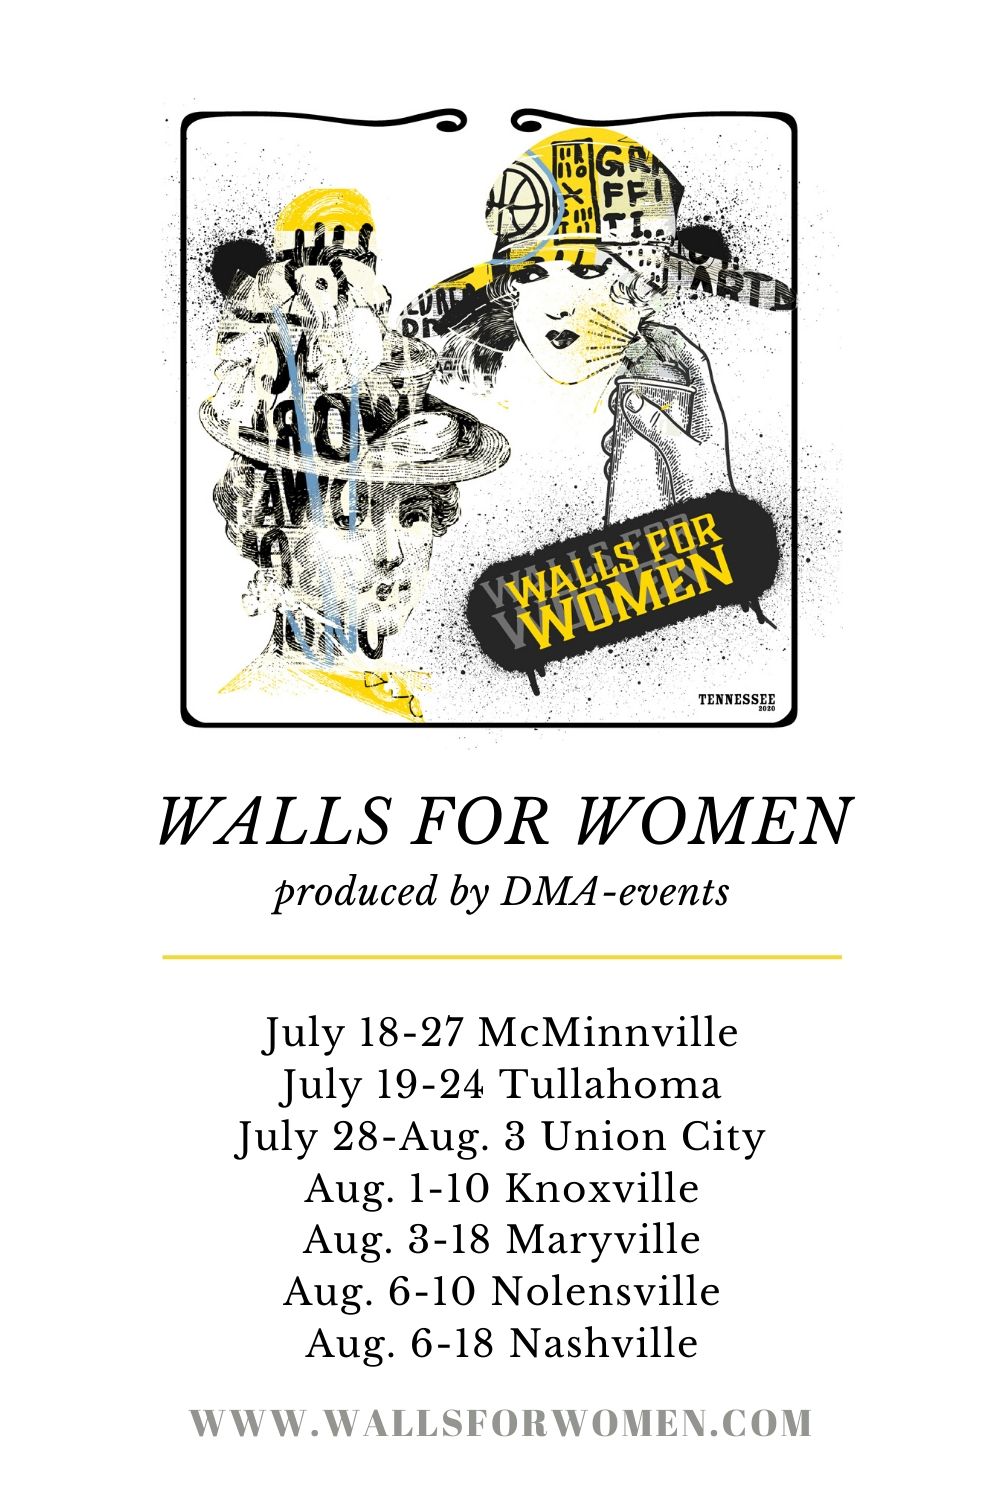 Walls for Women mural locations